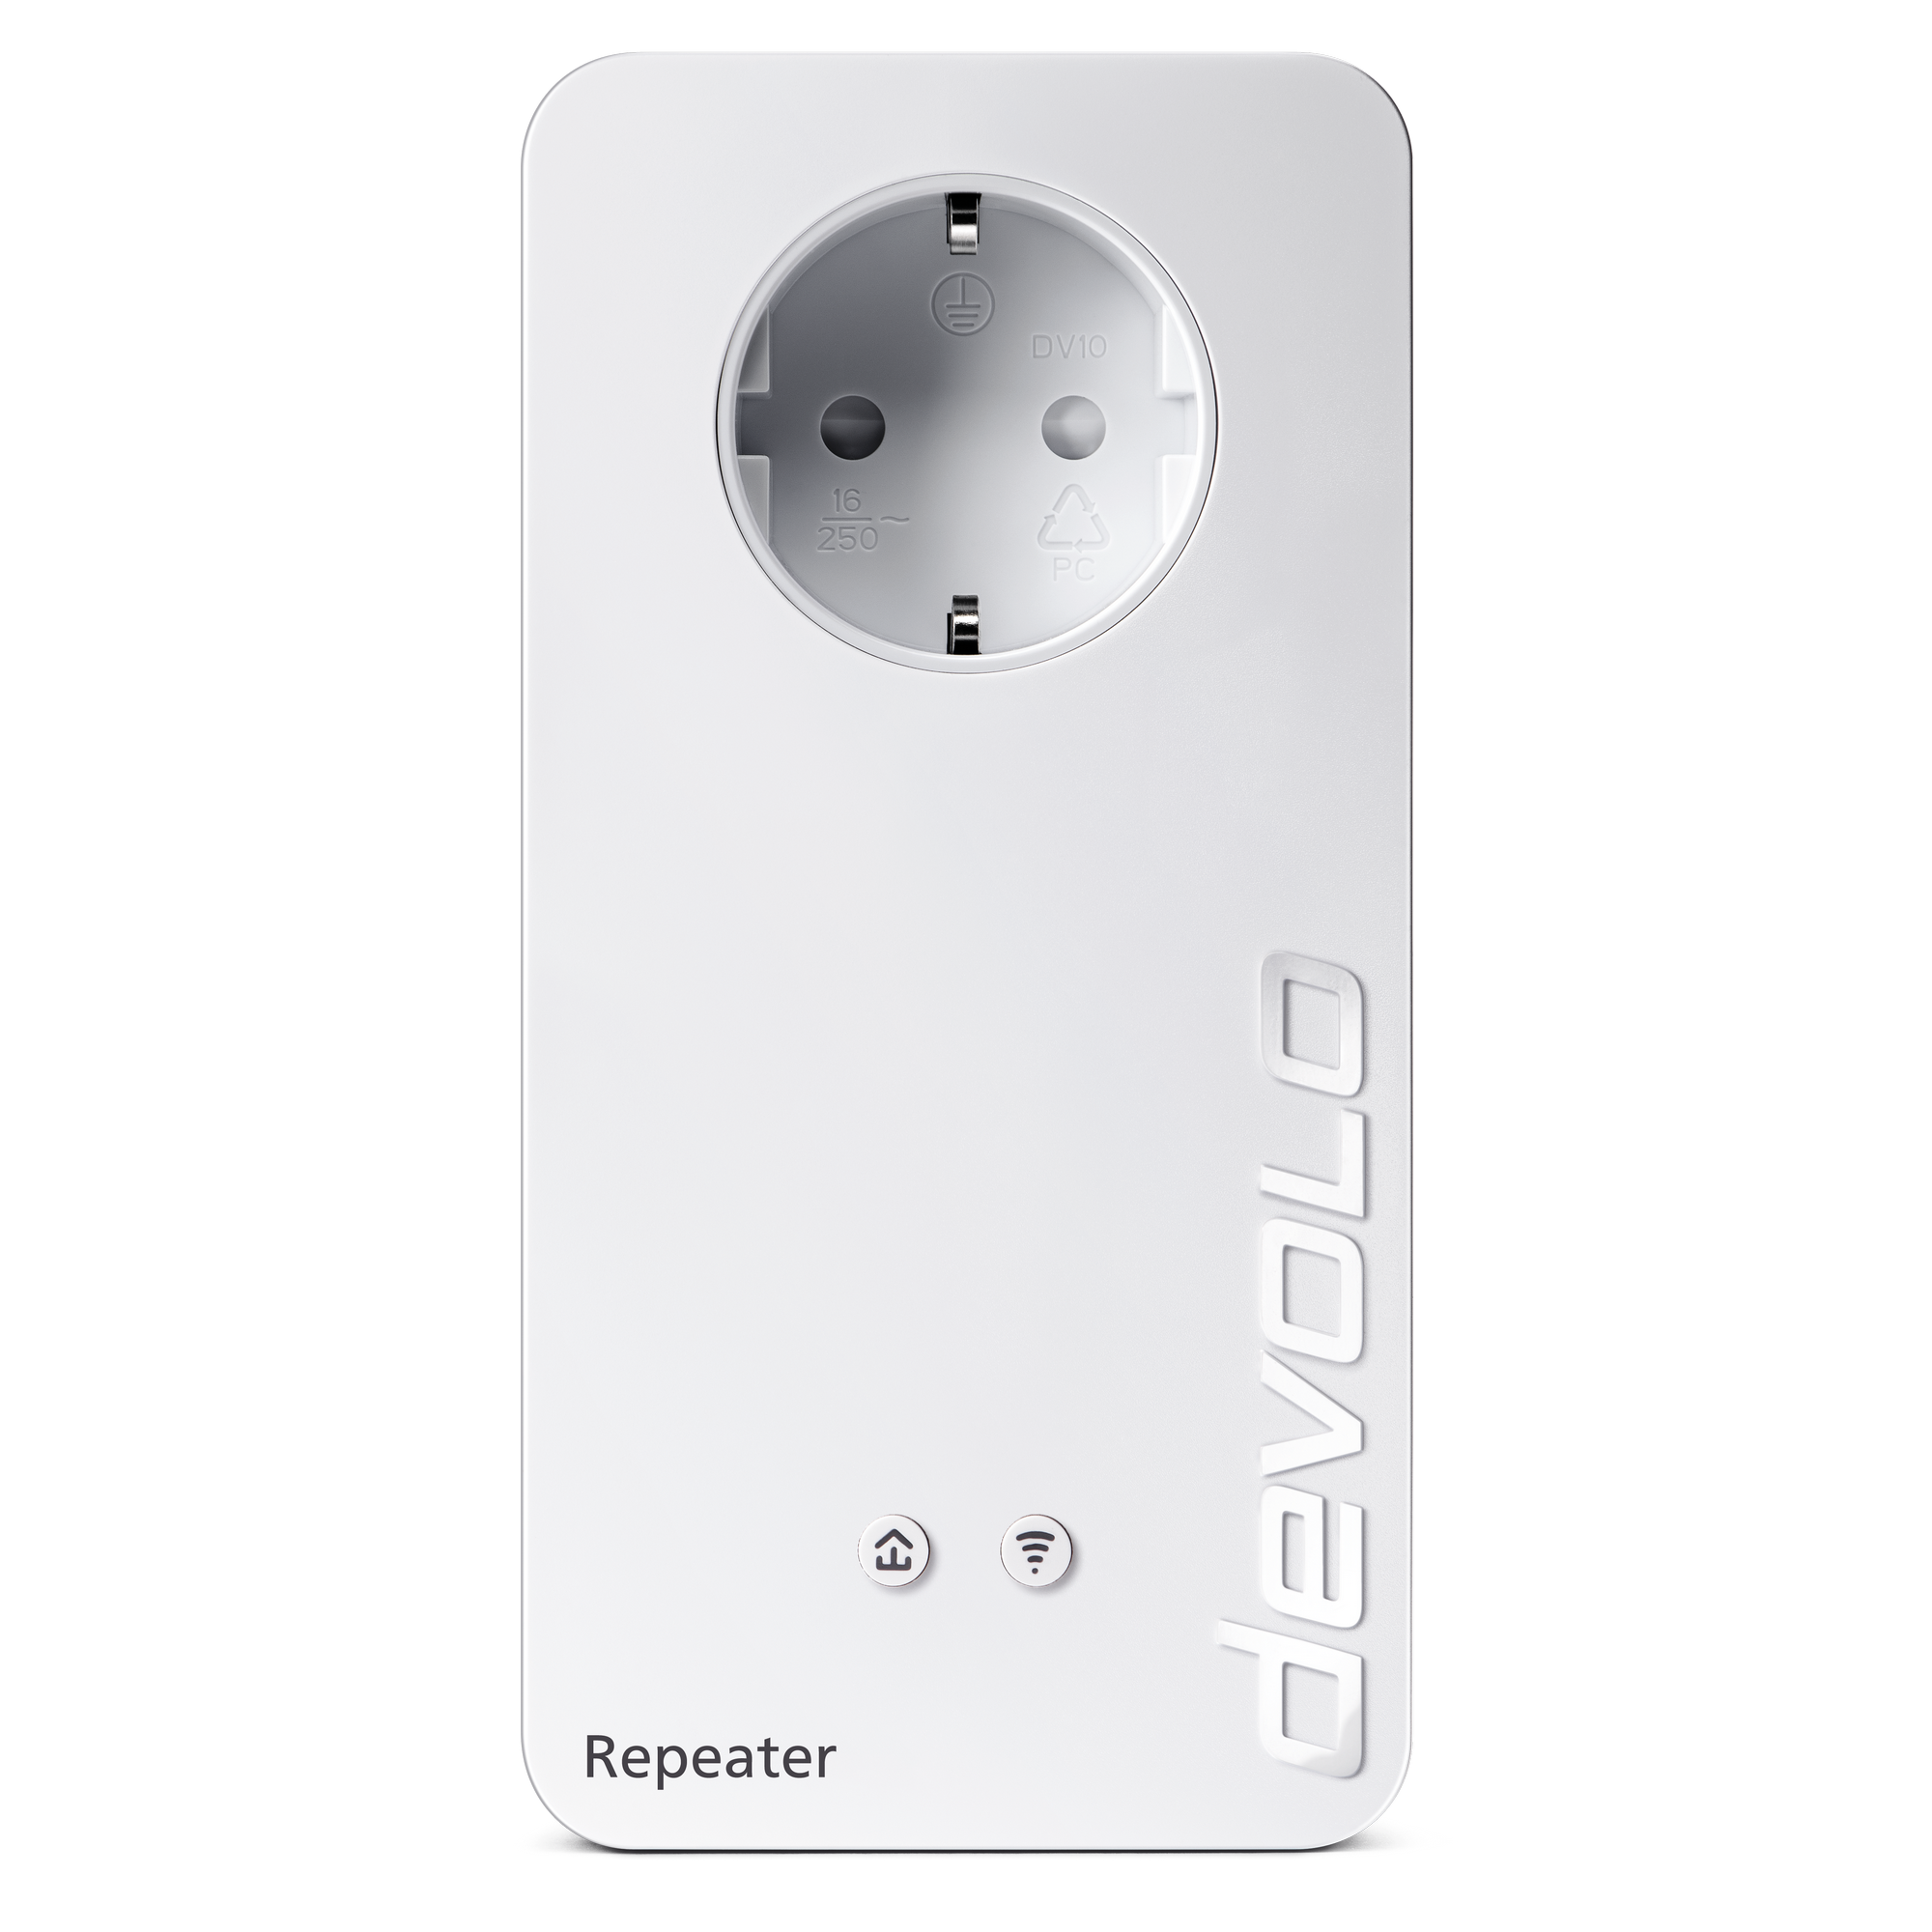 WLAN-Repeater 'Repeater+ ac' weiß 2,4/5 GHz 867 Mbit/s + product picture